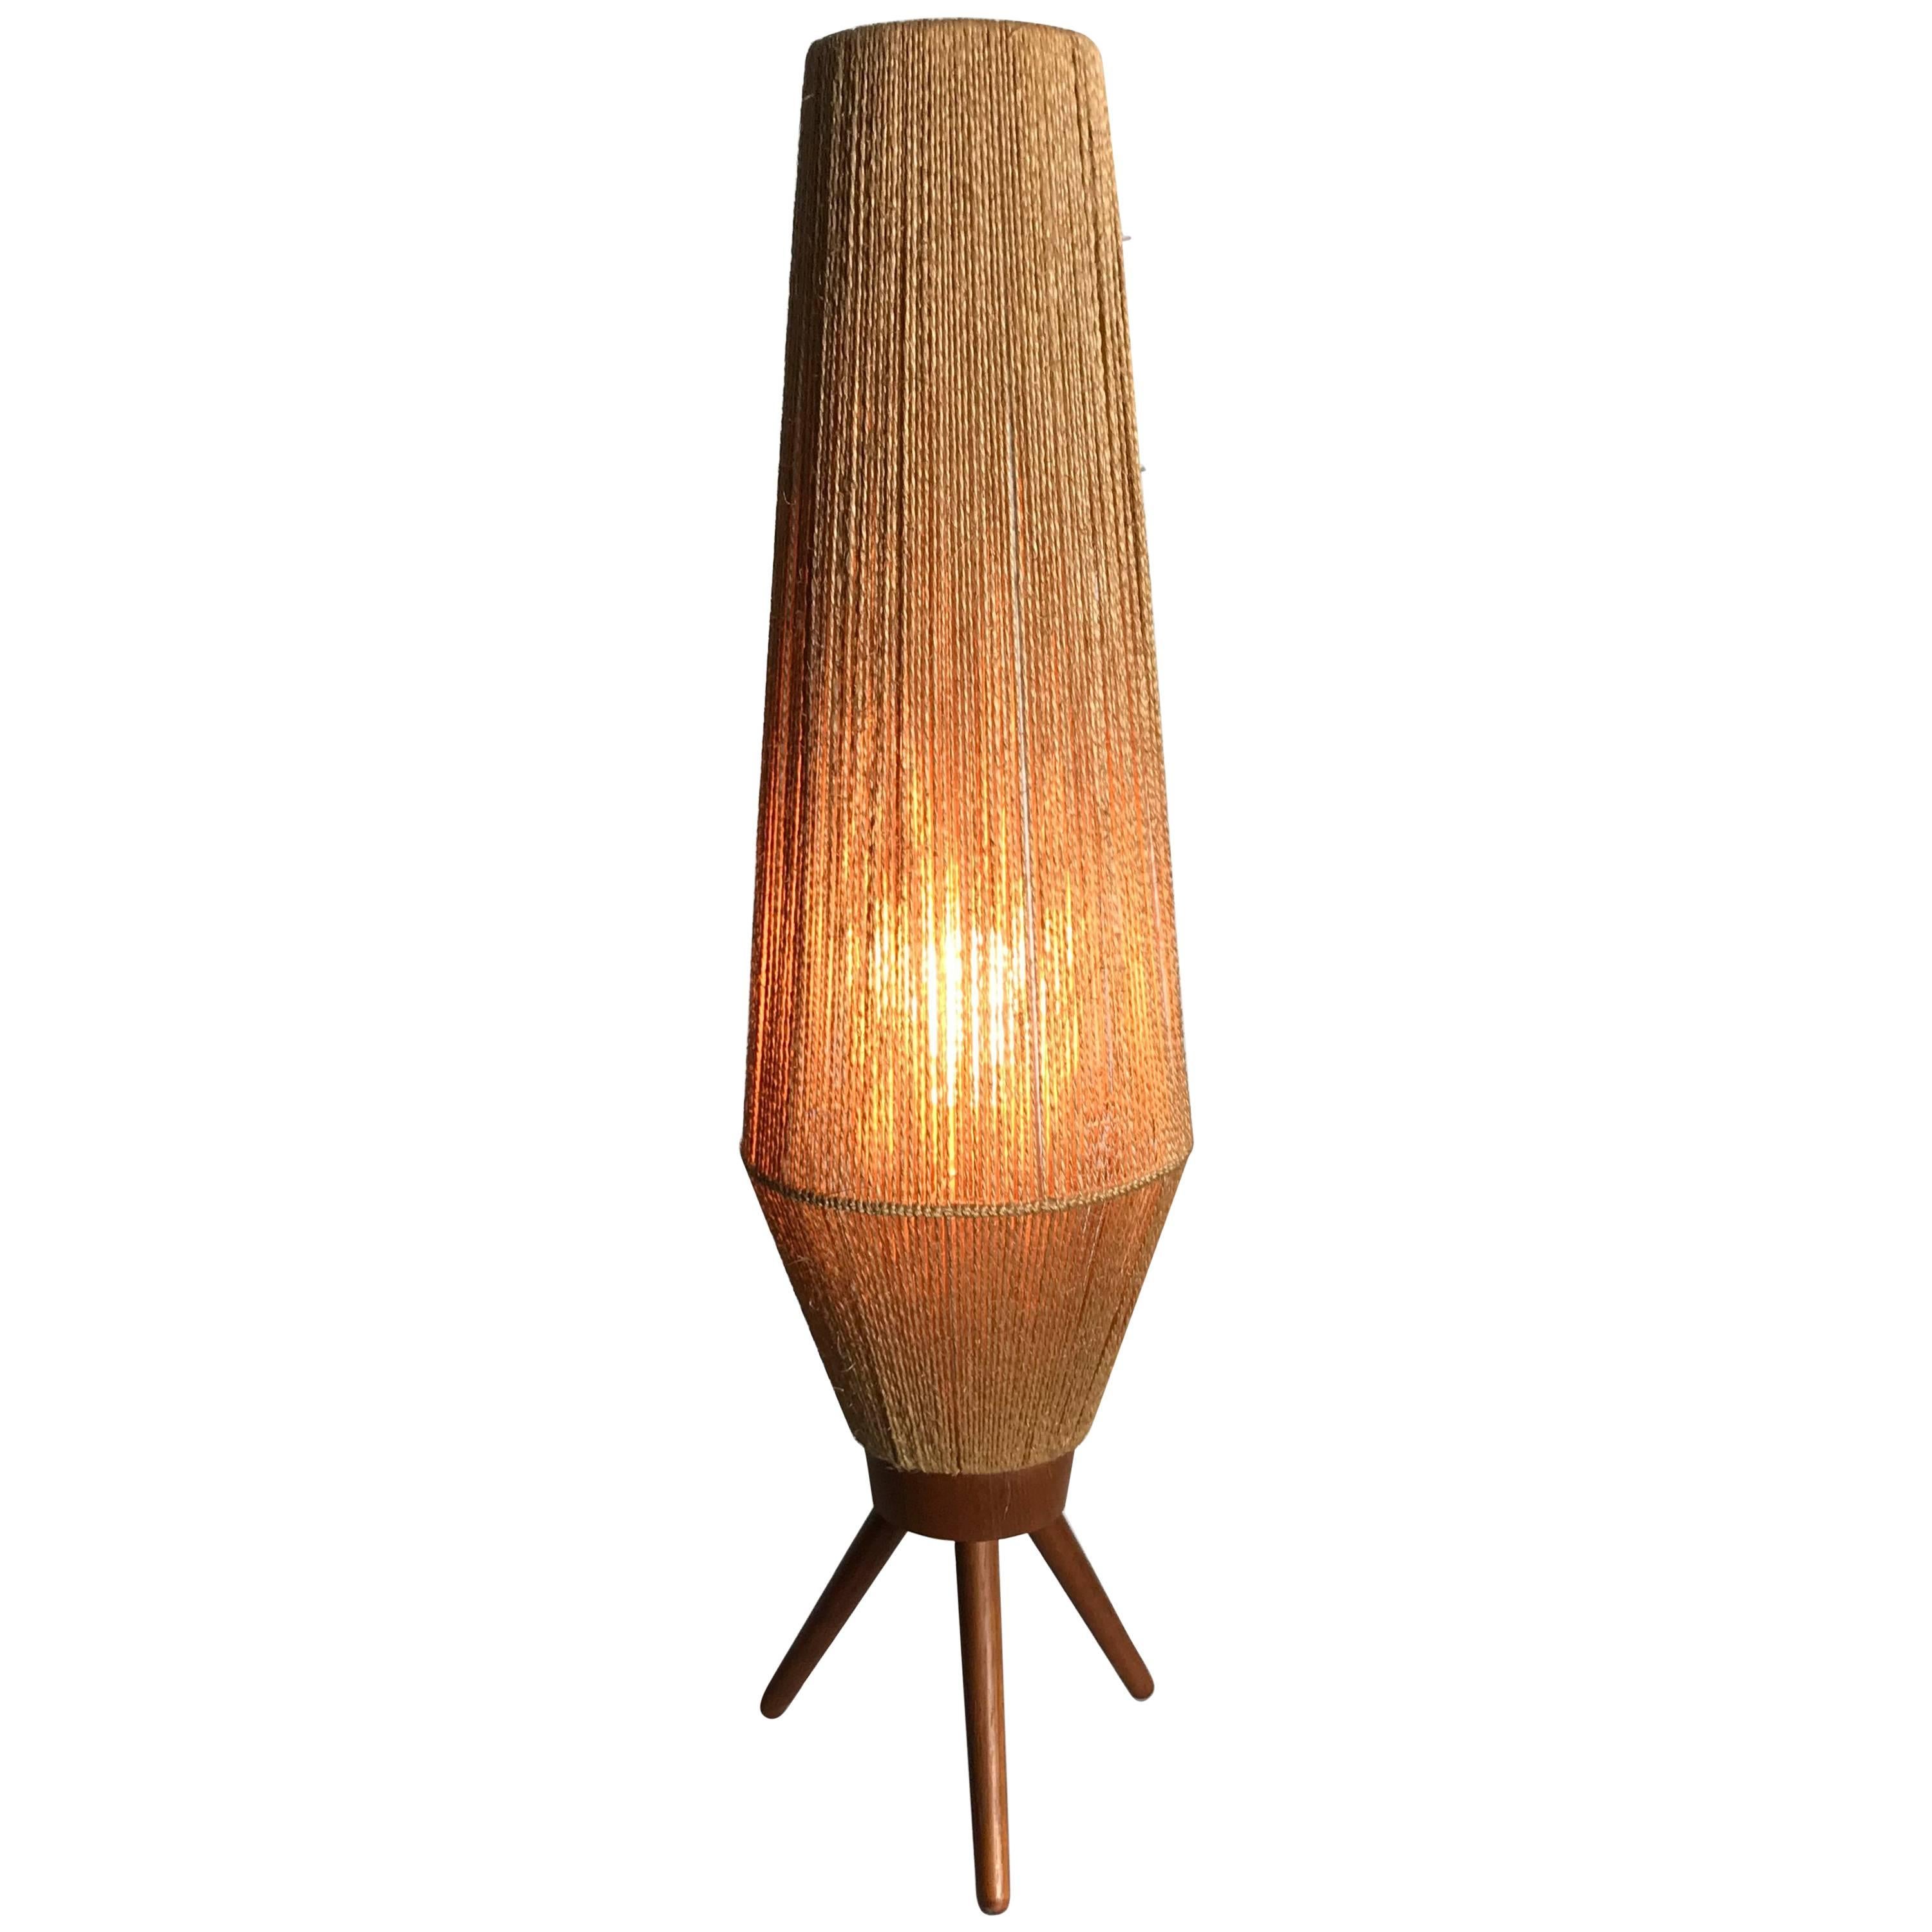 Mid-Century Modern Rope and Teak Table Lamp by Fog & Mørup